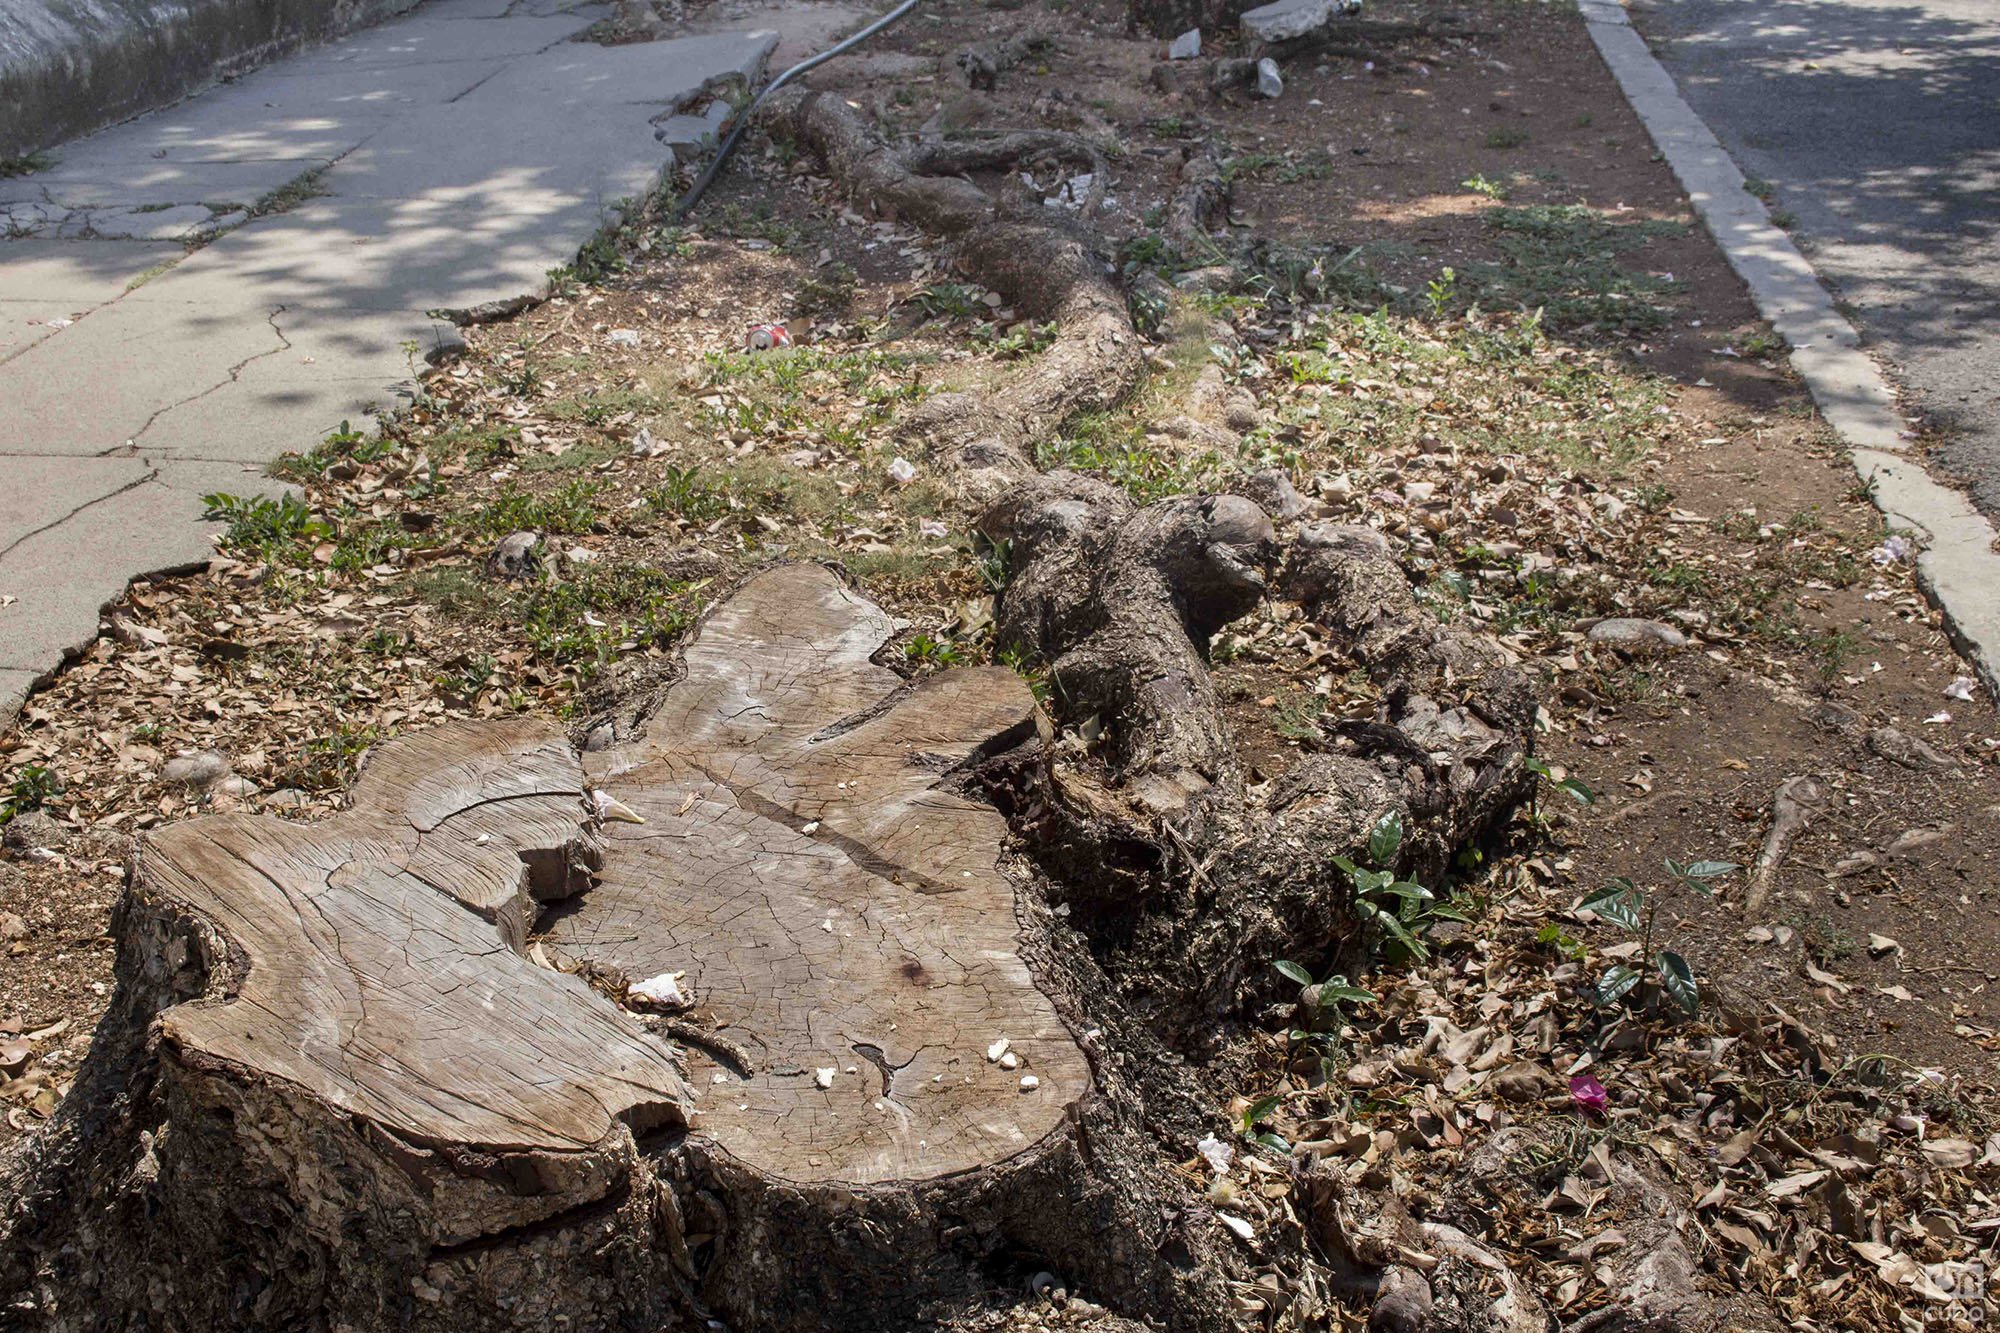 Tree stump located near the corner of 15 and Paseo, reported by the Habana Verde Facebook group. Photo: Yoel Rodríguez